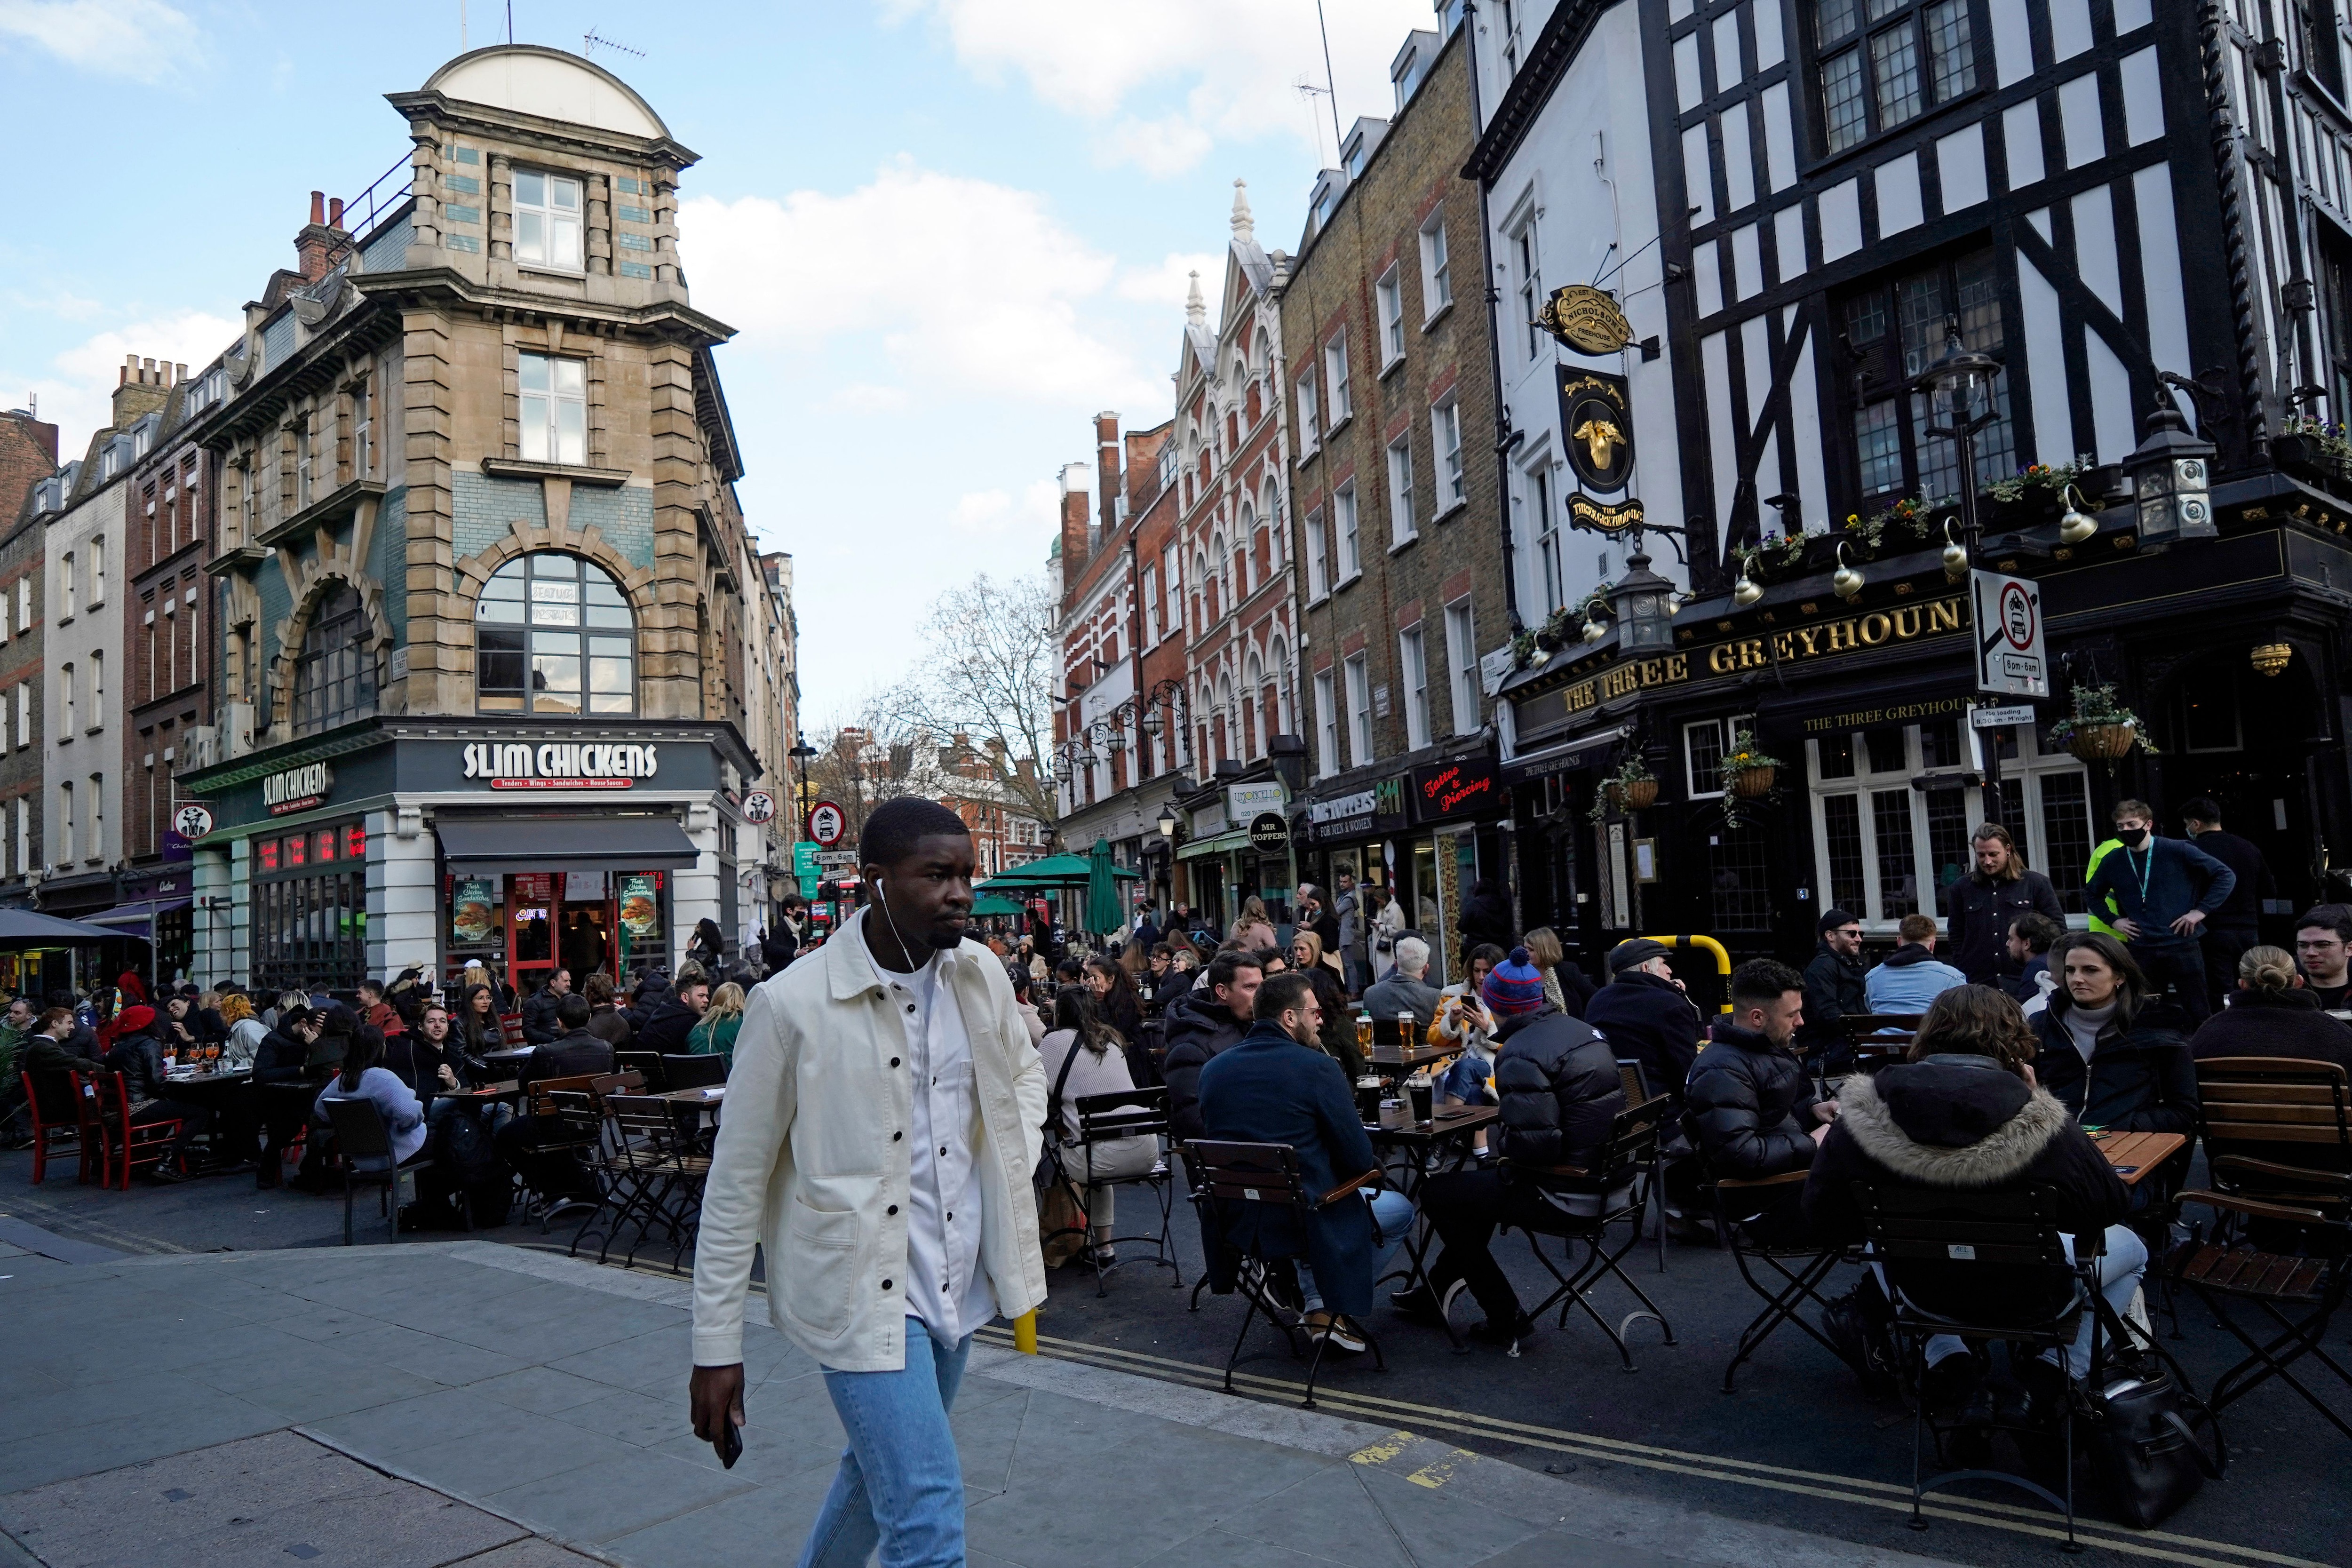 People drink in the street in the Soho area of London, on 16 April, 2021 following step two of the government's roadmap out of England's third lockdown. 